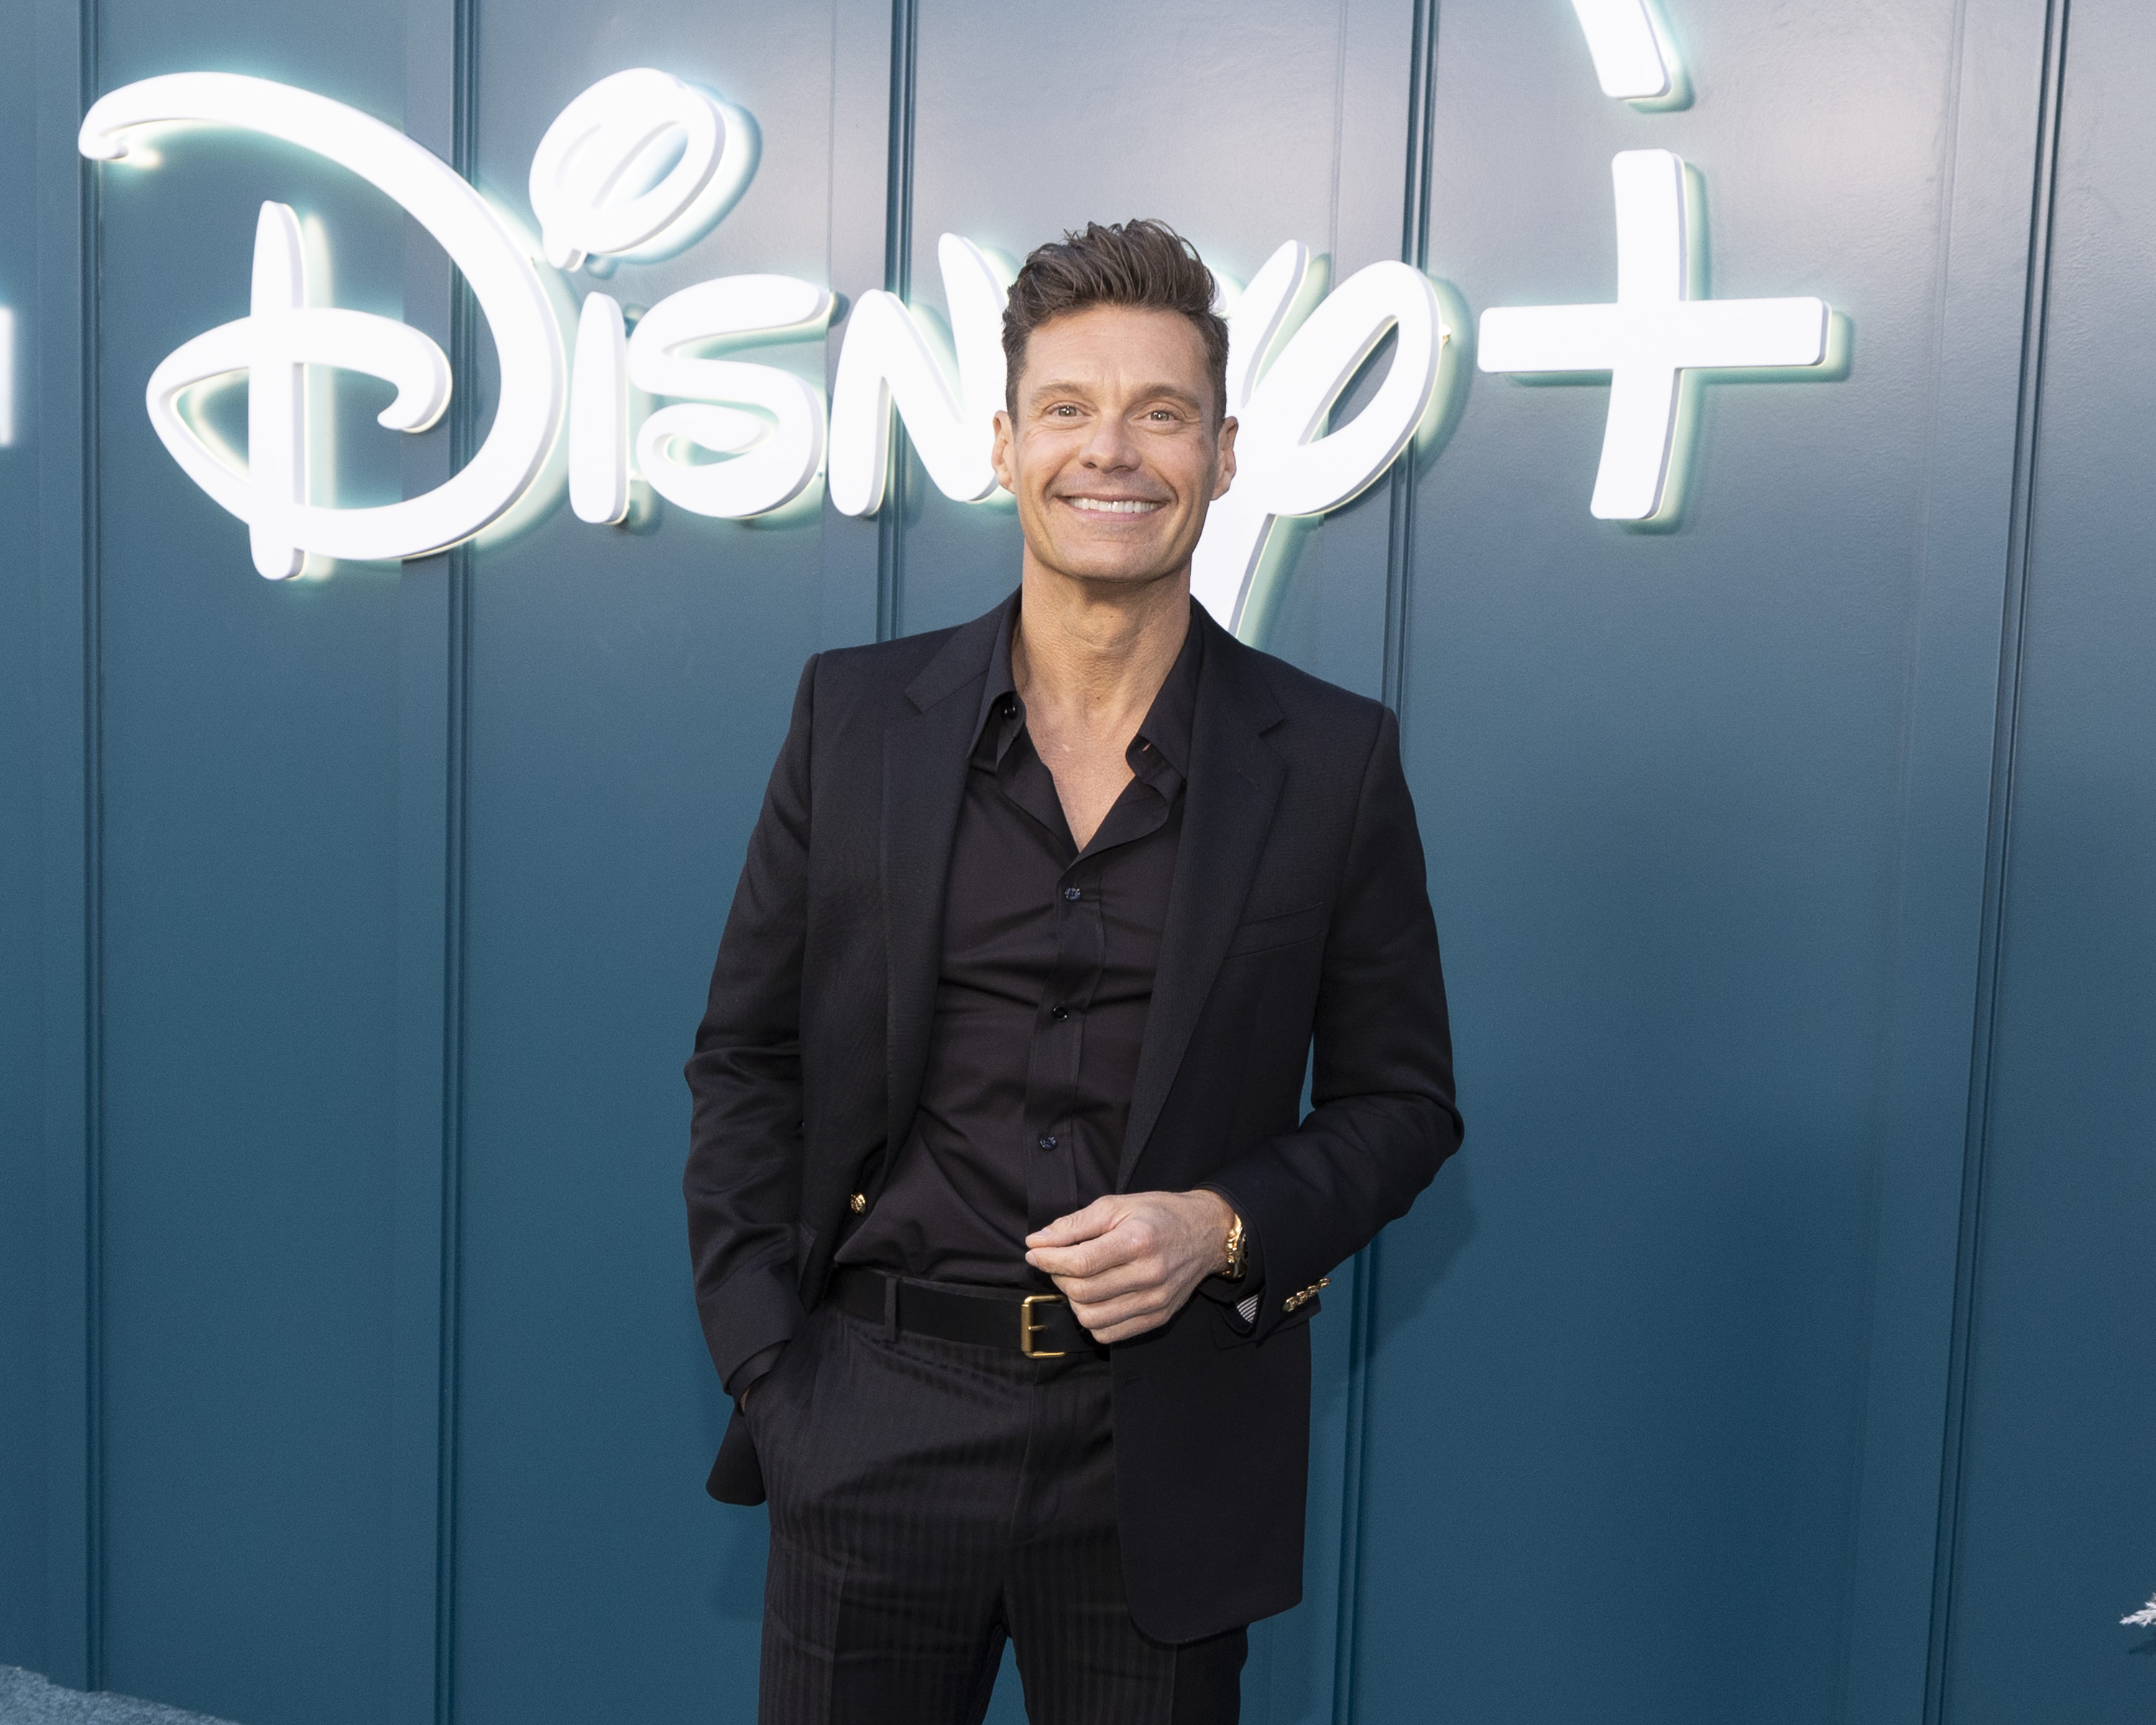 Ryan Seacrest's other entertainment duties include hosting American Idol and hosting his own radio show